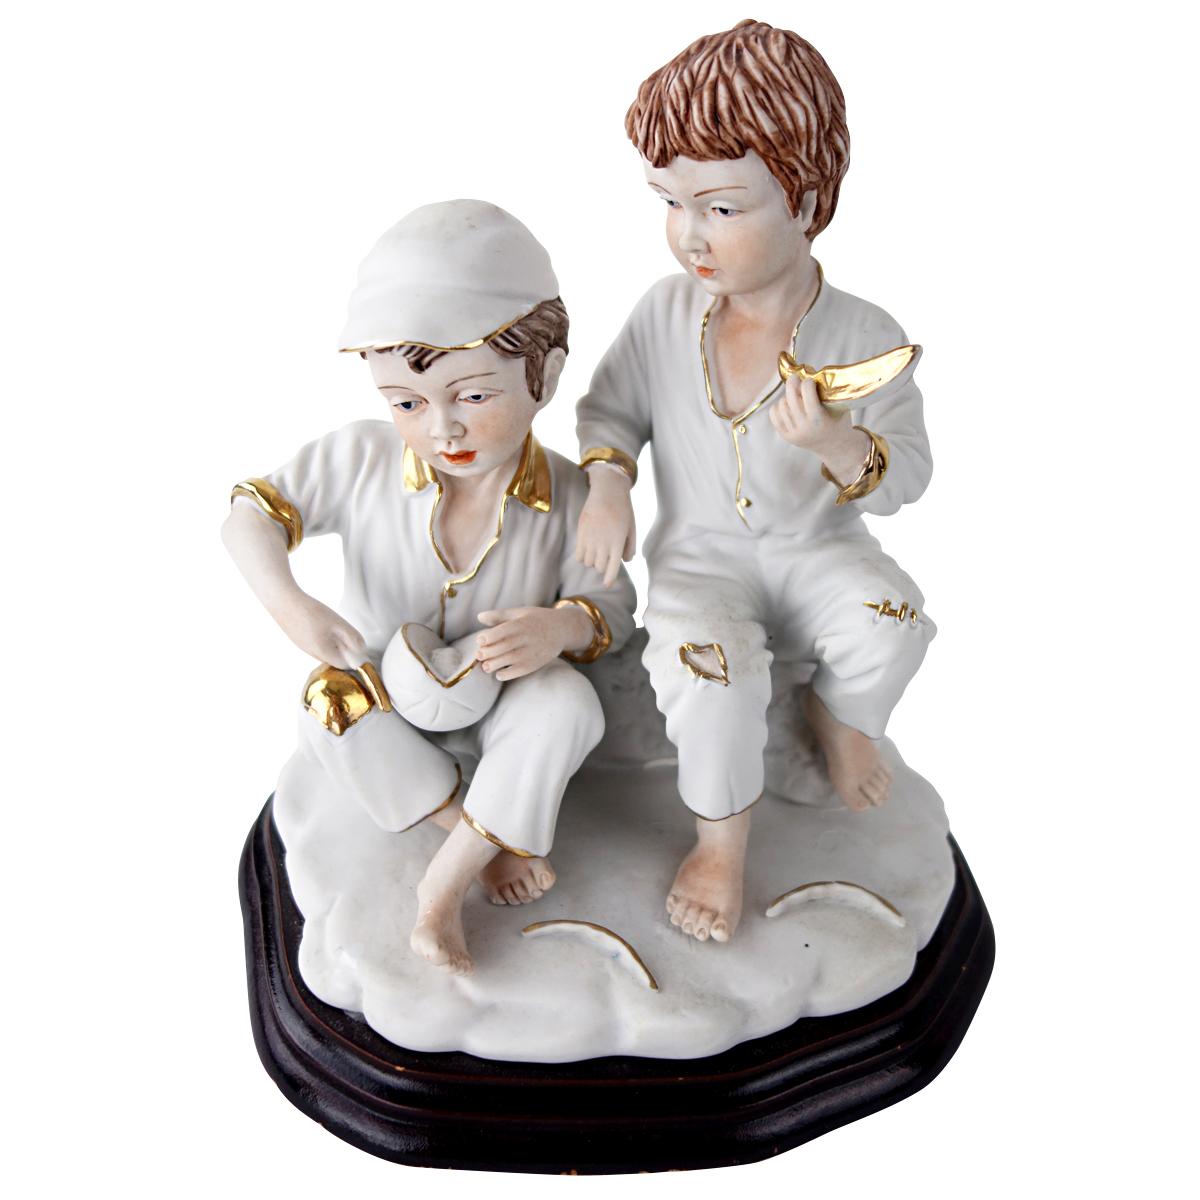 Refined statuette with wonderful details. It is made of biscuit porcelain.
These two scallywags may be barefoot and have tear and wear on their trousers, they do not look miserable. Their legs, sleeves and collars have been gilded. Even the melon